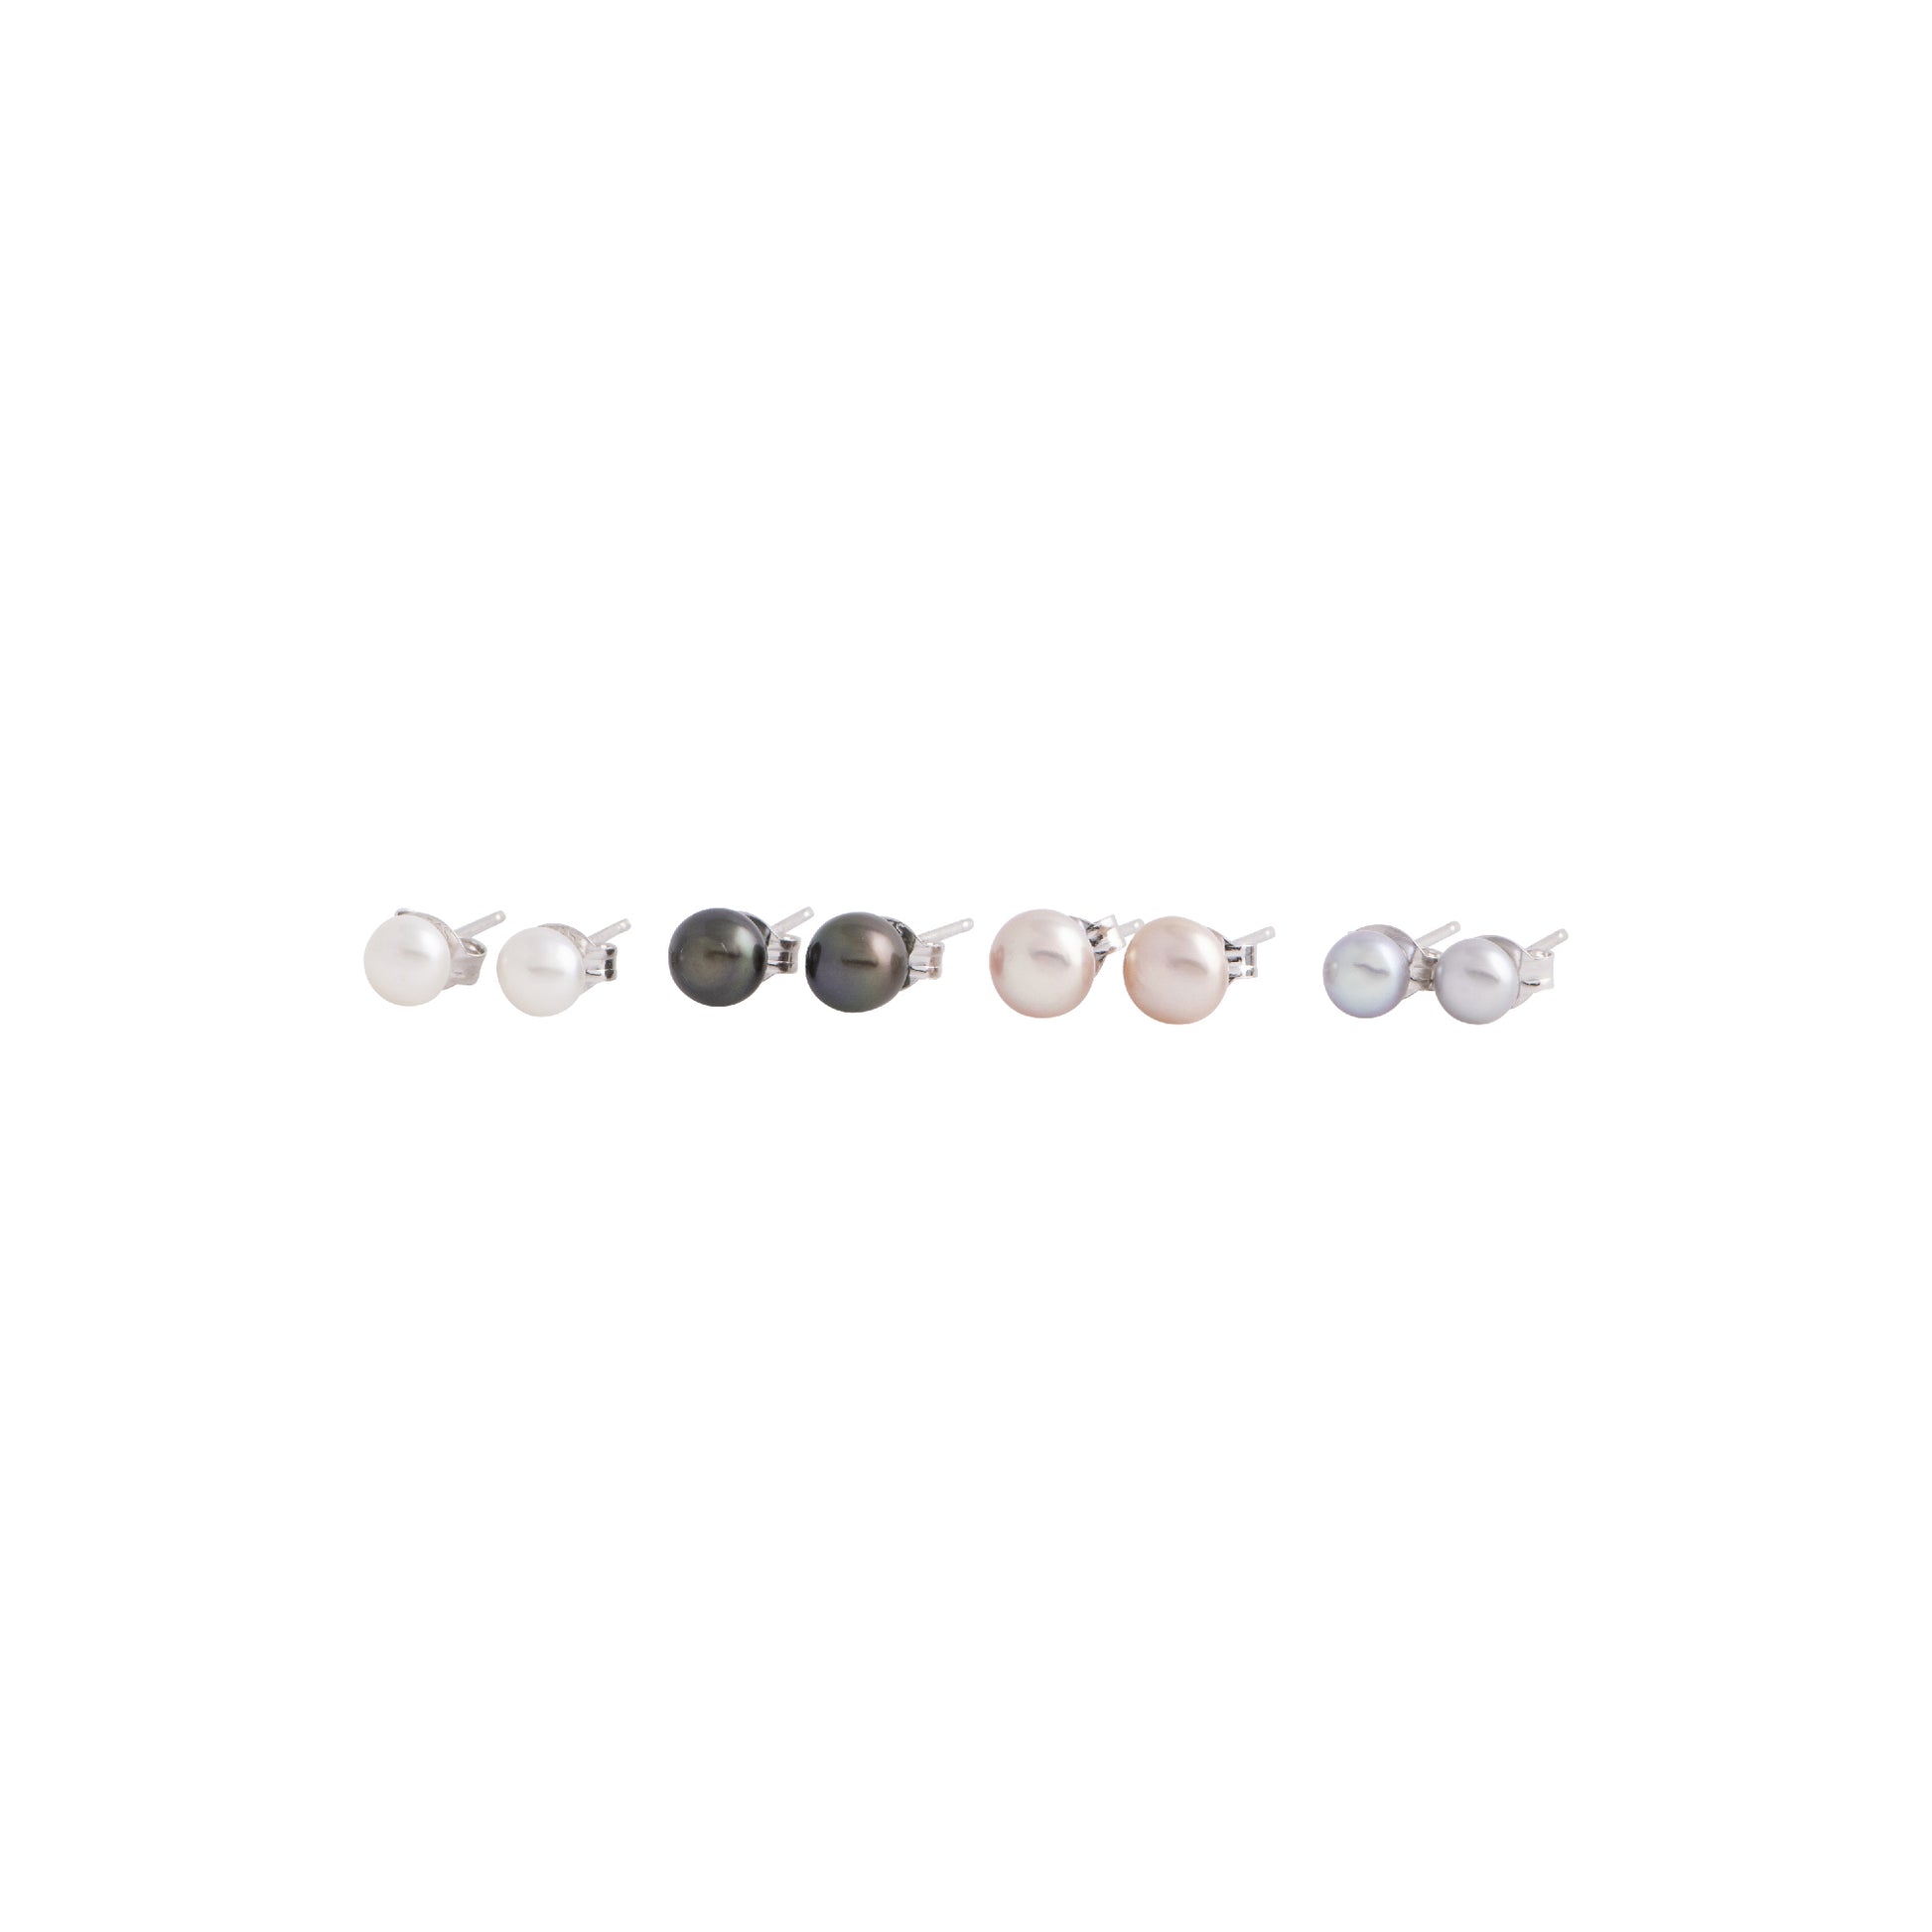 Alika - Small (5mm) pearl nickle-free earrings (All 4 colors)